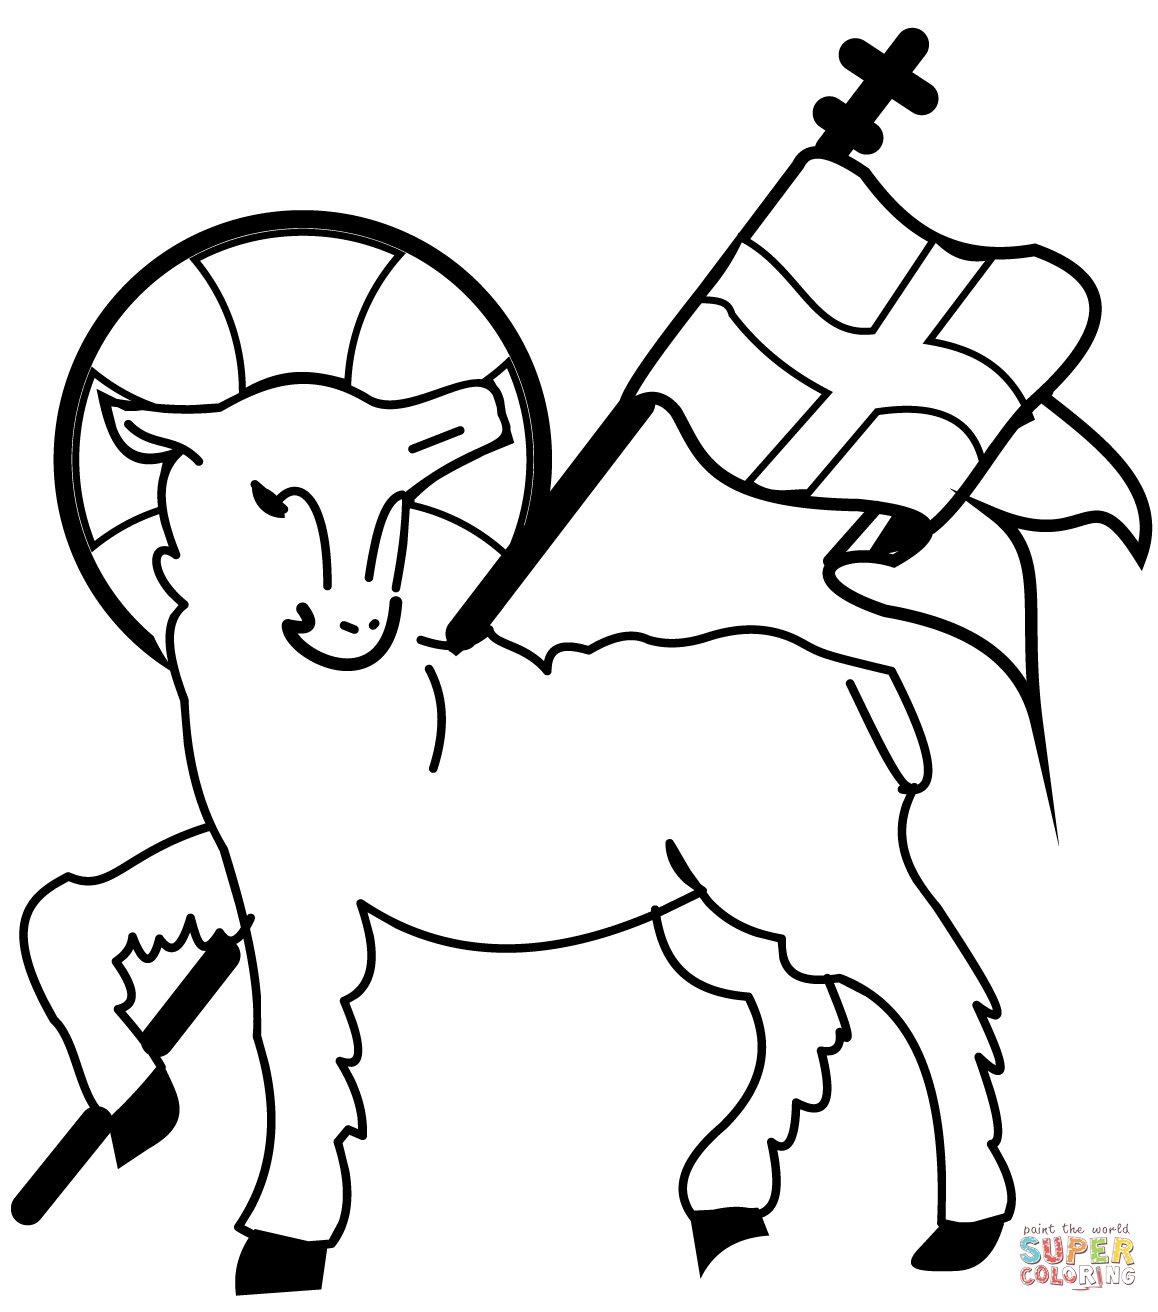 Christian lamb coloring page free printable coloring pages